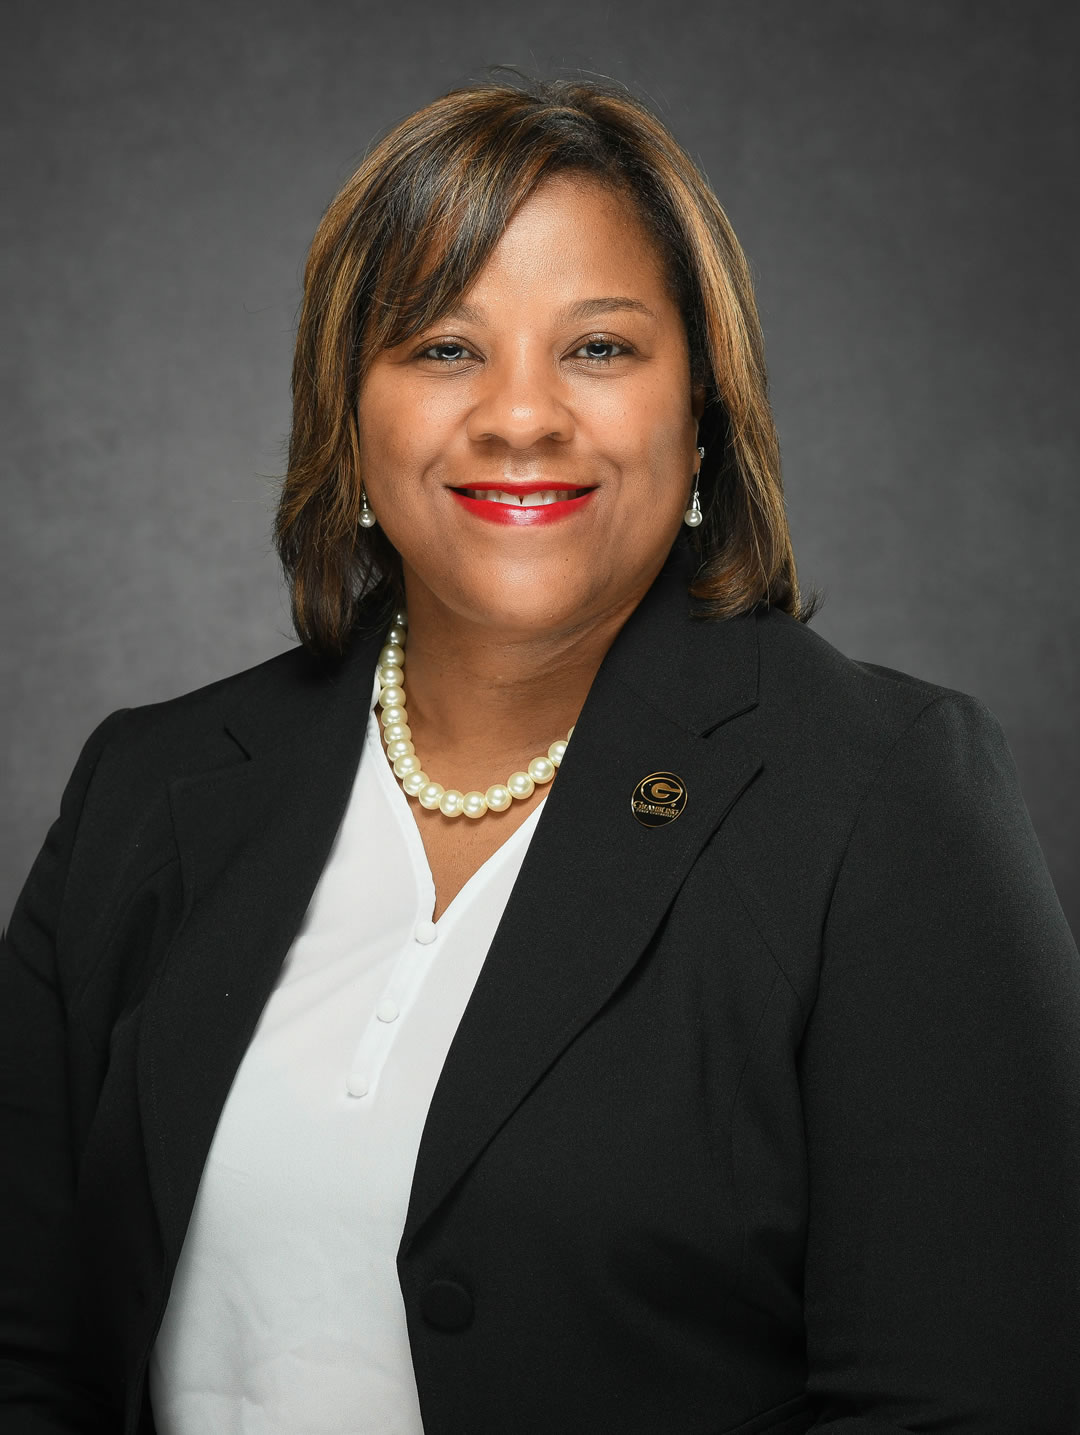 Dr. Jacqueline J. Garrison, DSW, LCSW - Associate Dean of the School of Social Work and Assistant Professor 